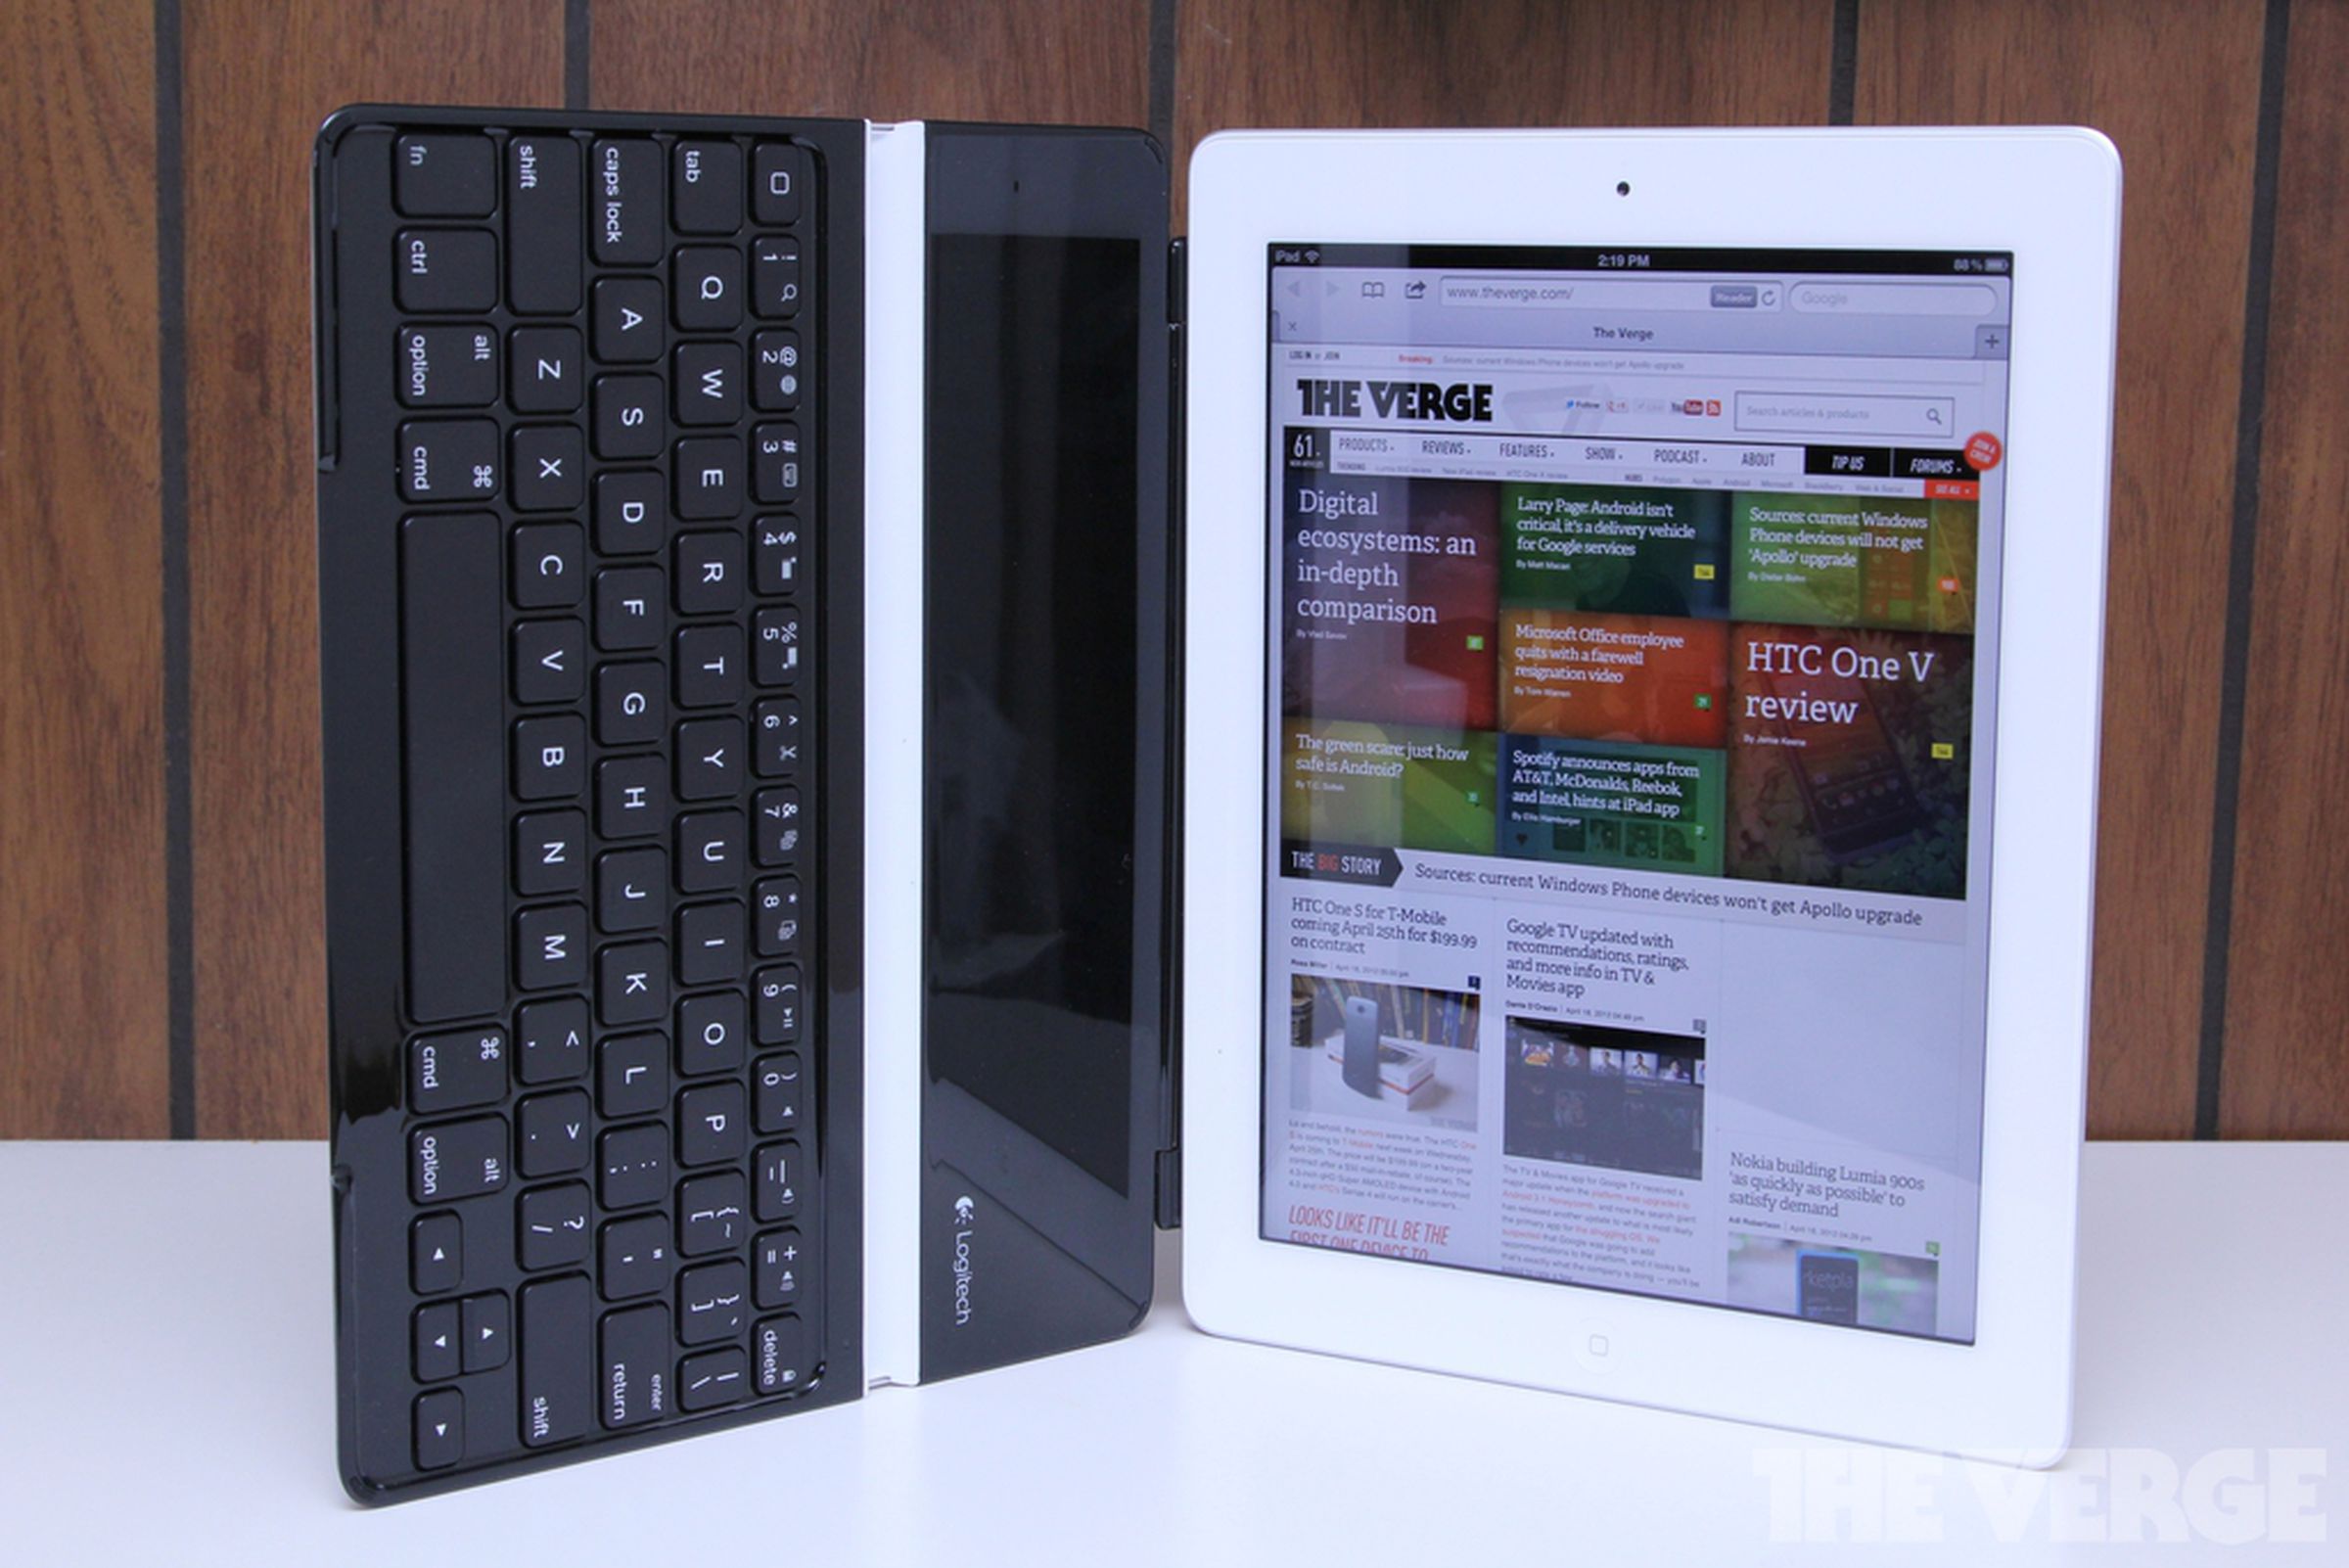 Logitech Ultrathin Keyboard Cover for iPad hands-on pictures